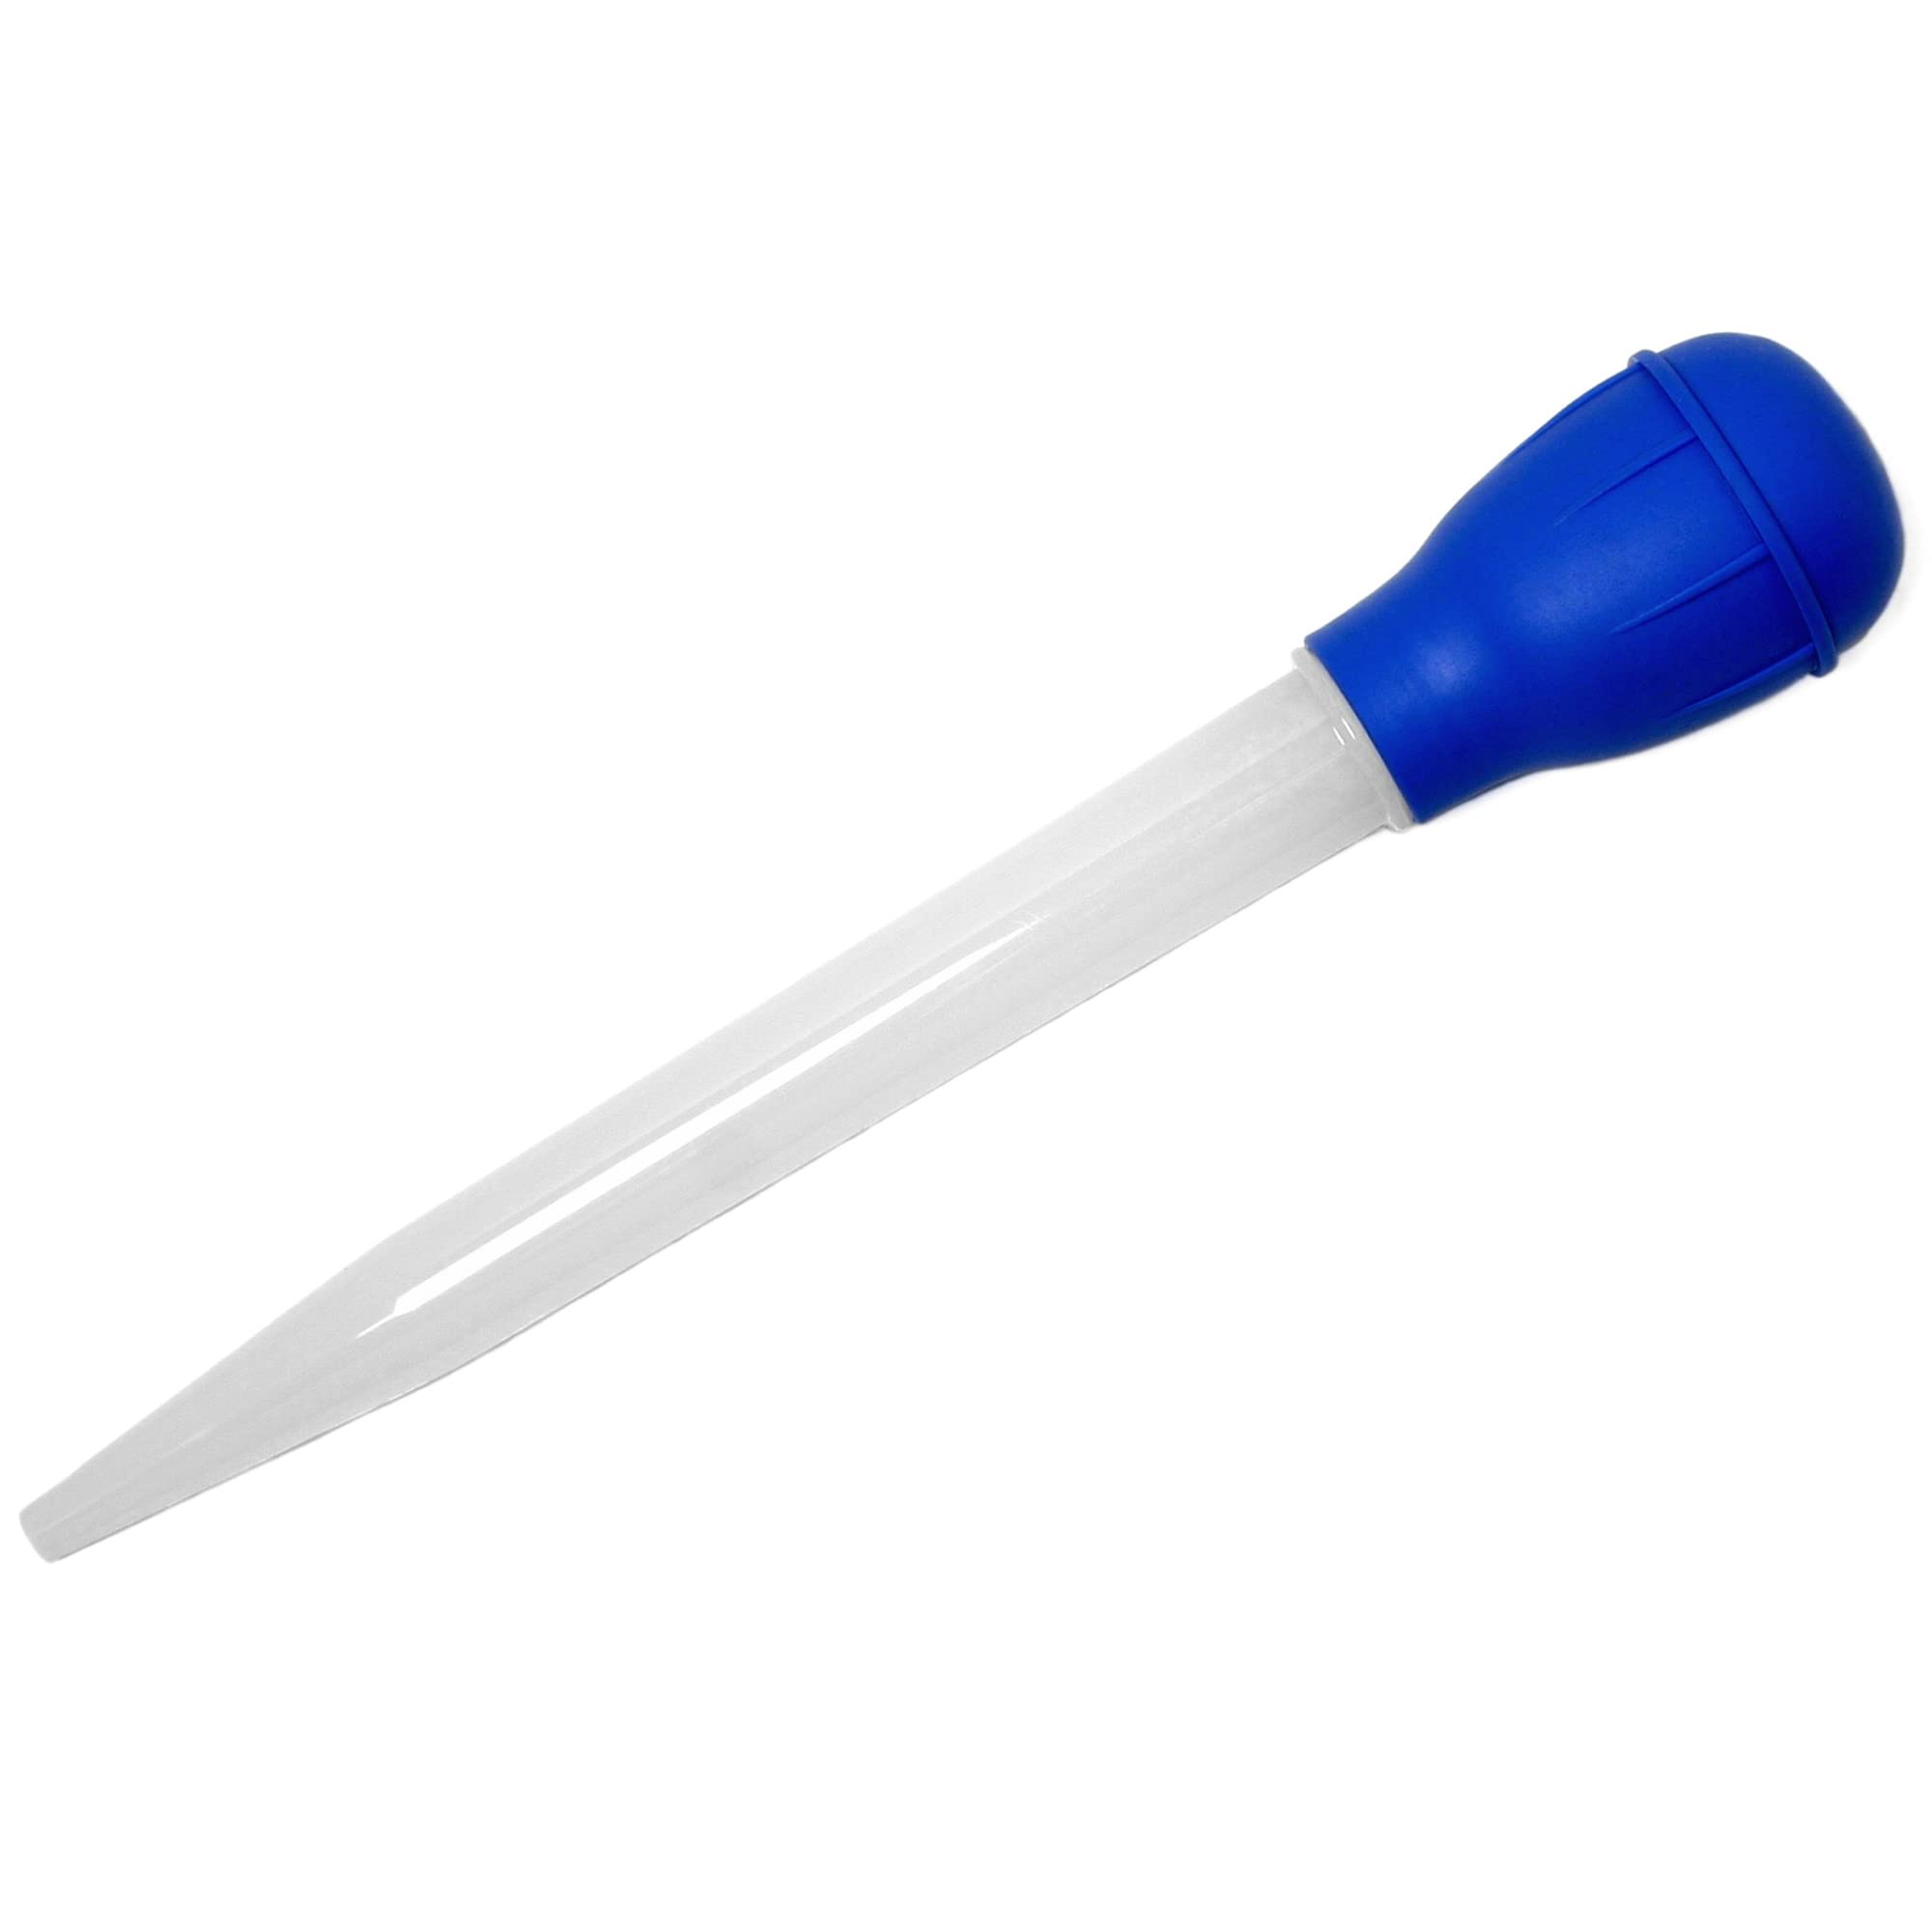 11.5" Chef Craft Nylon Tube Baster (White/Blue) $1 + Free Shipping w/ Prime or on orders over $35